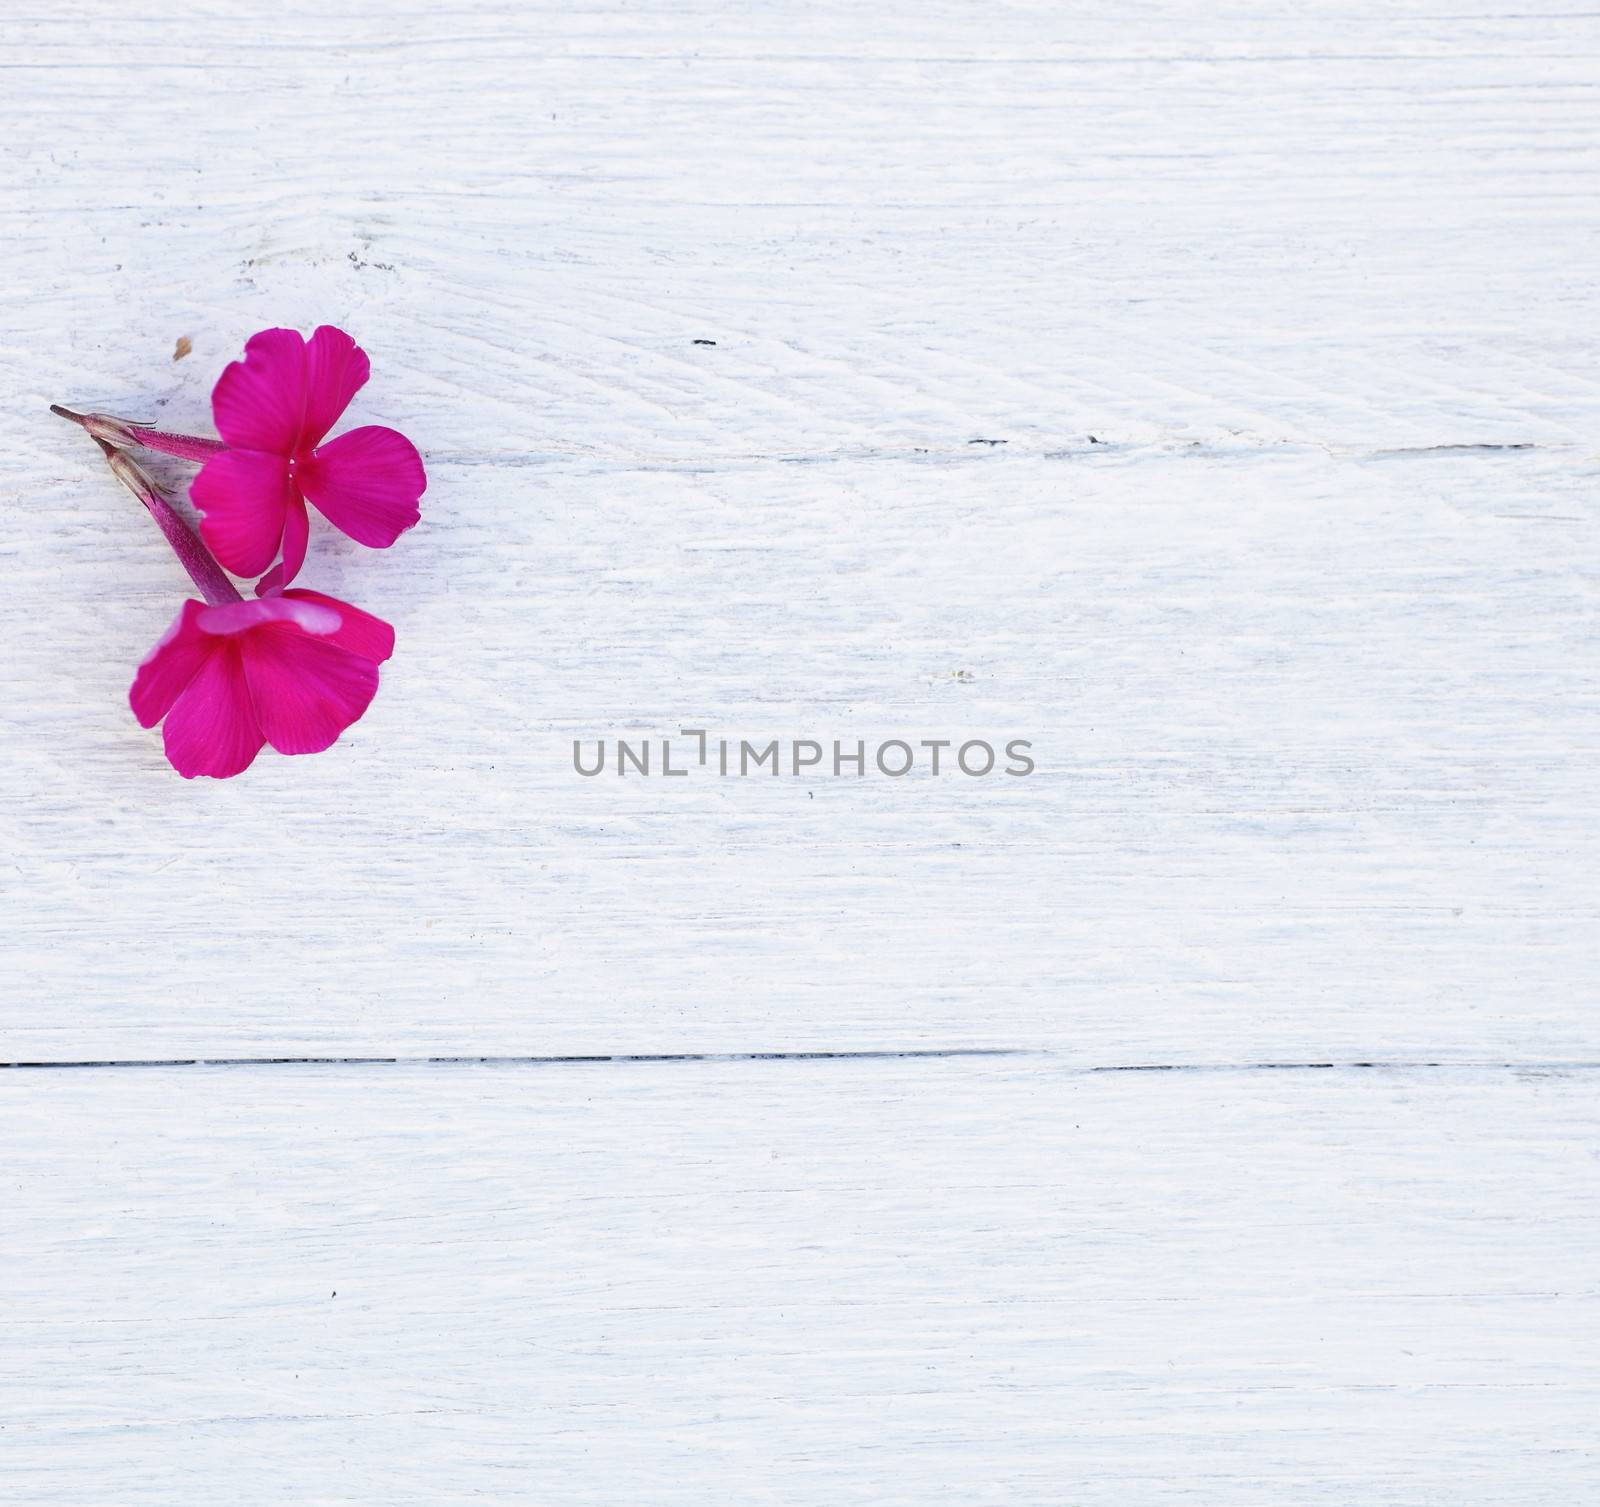 Rustic white wood background with rough painted boards and two pretty dainty magenta flowers arranged in the corner with copyspace